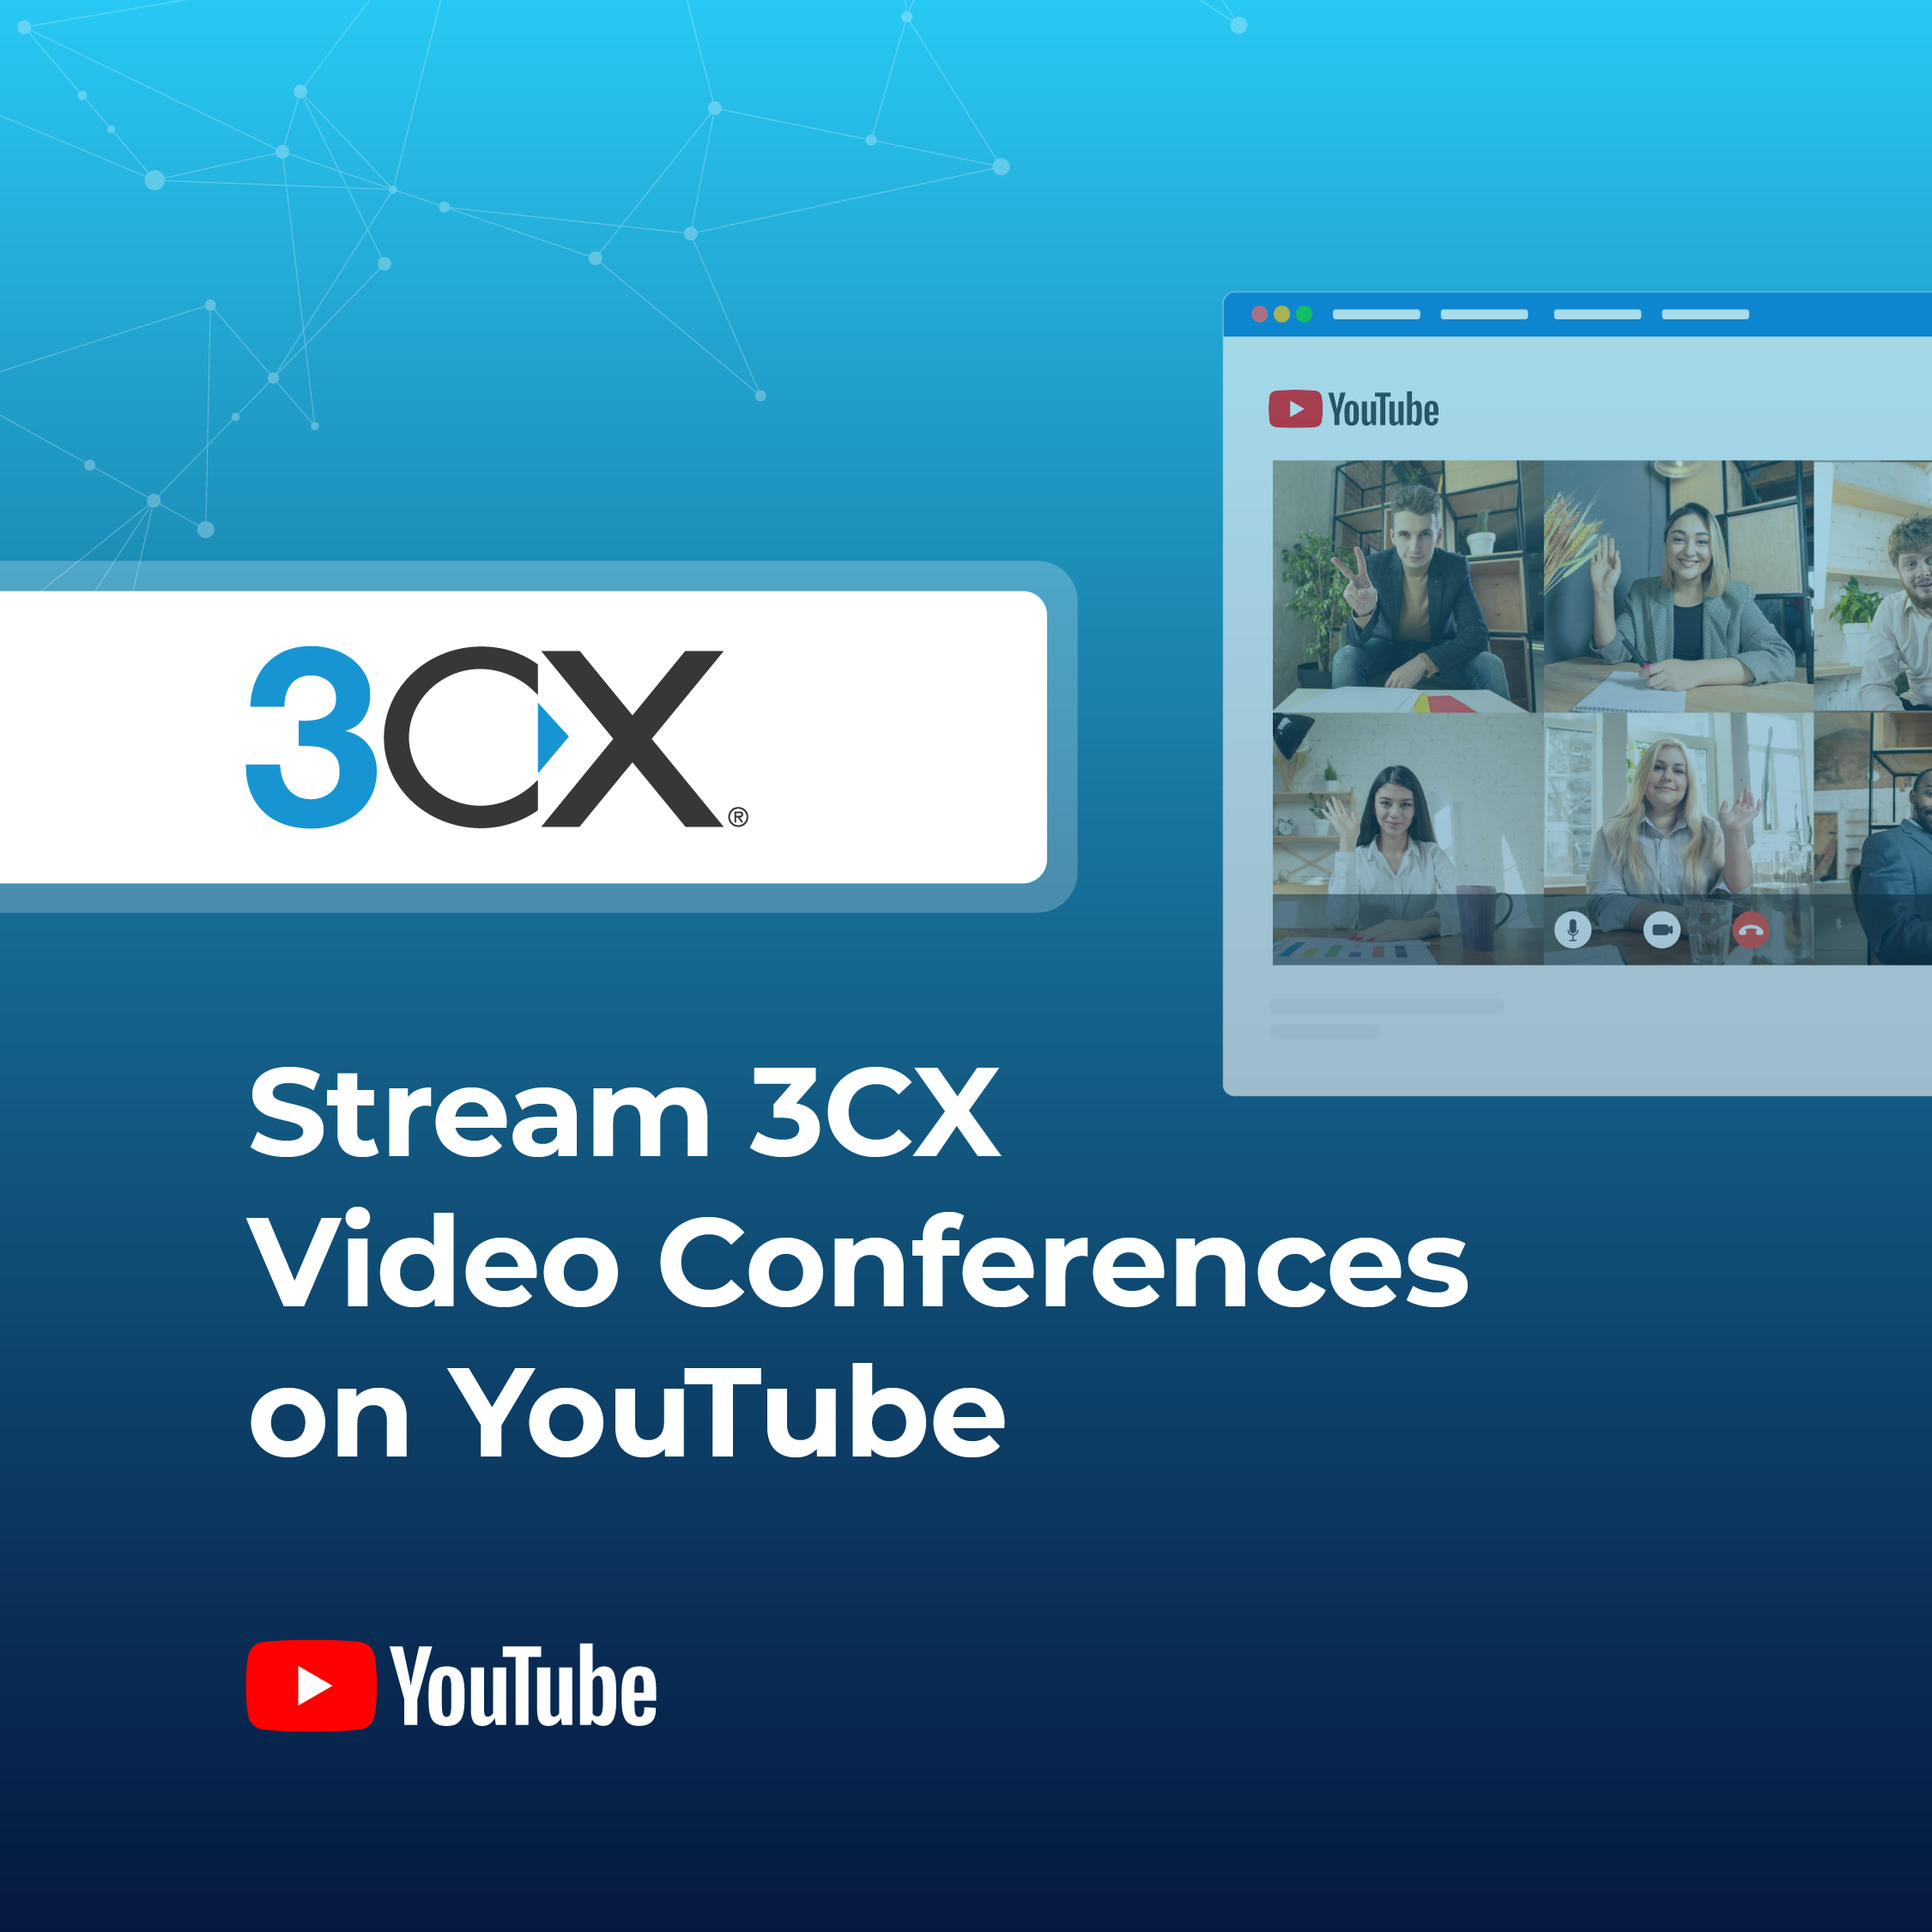 Stream 3CX Video Conferences on YouTube